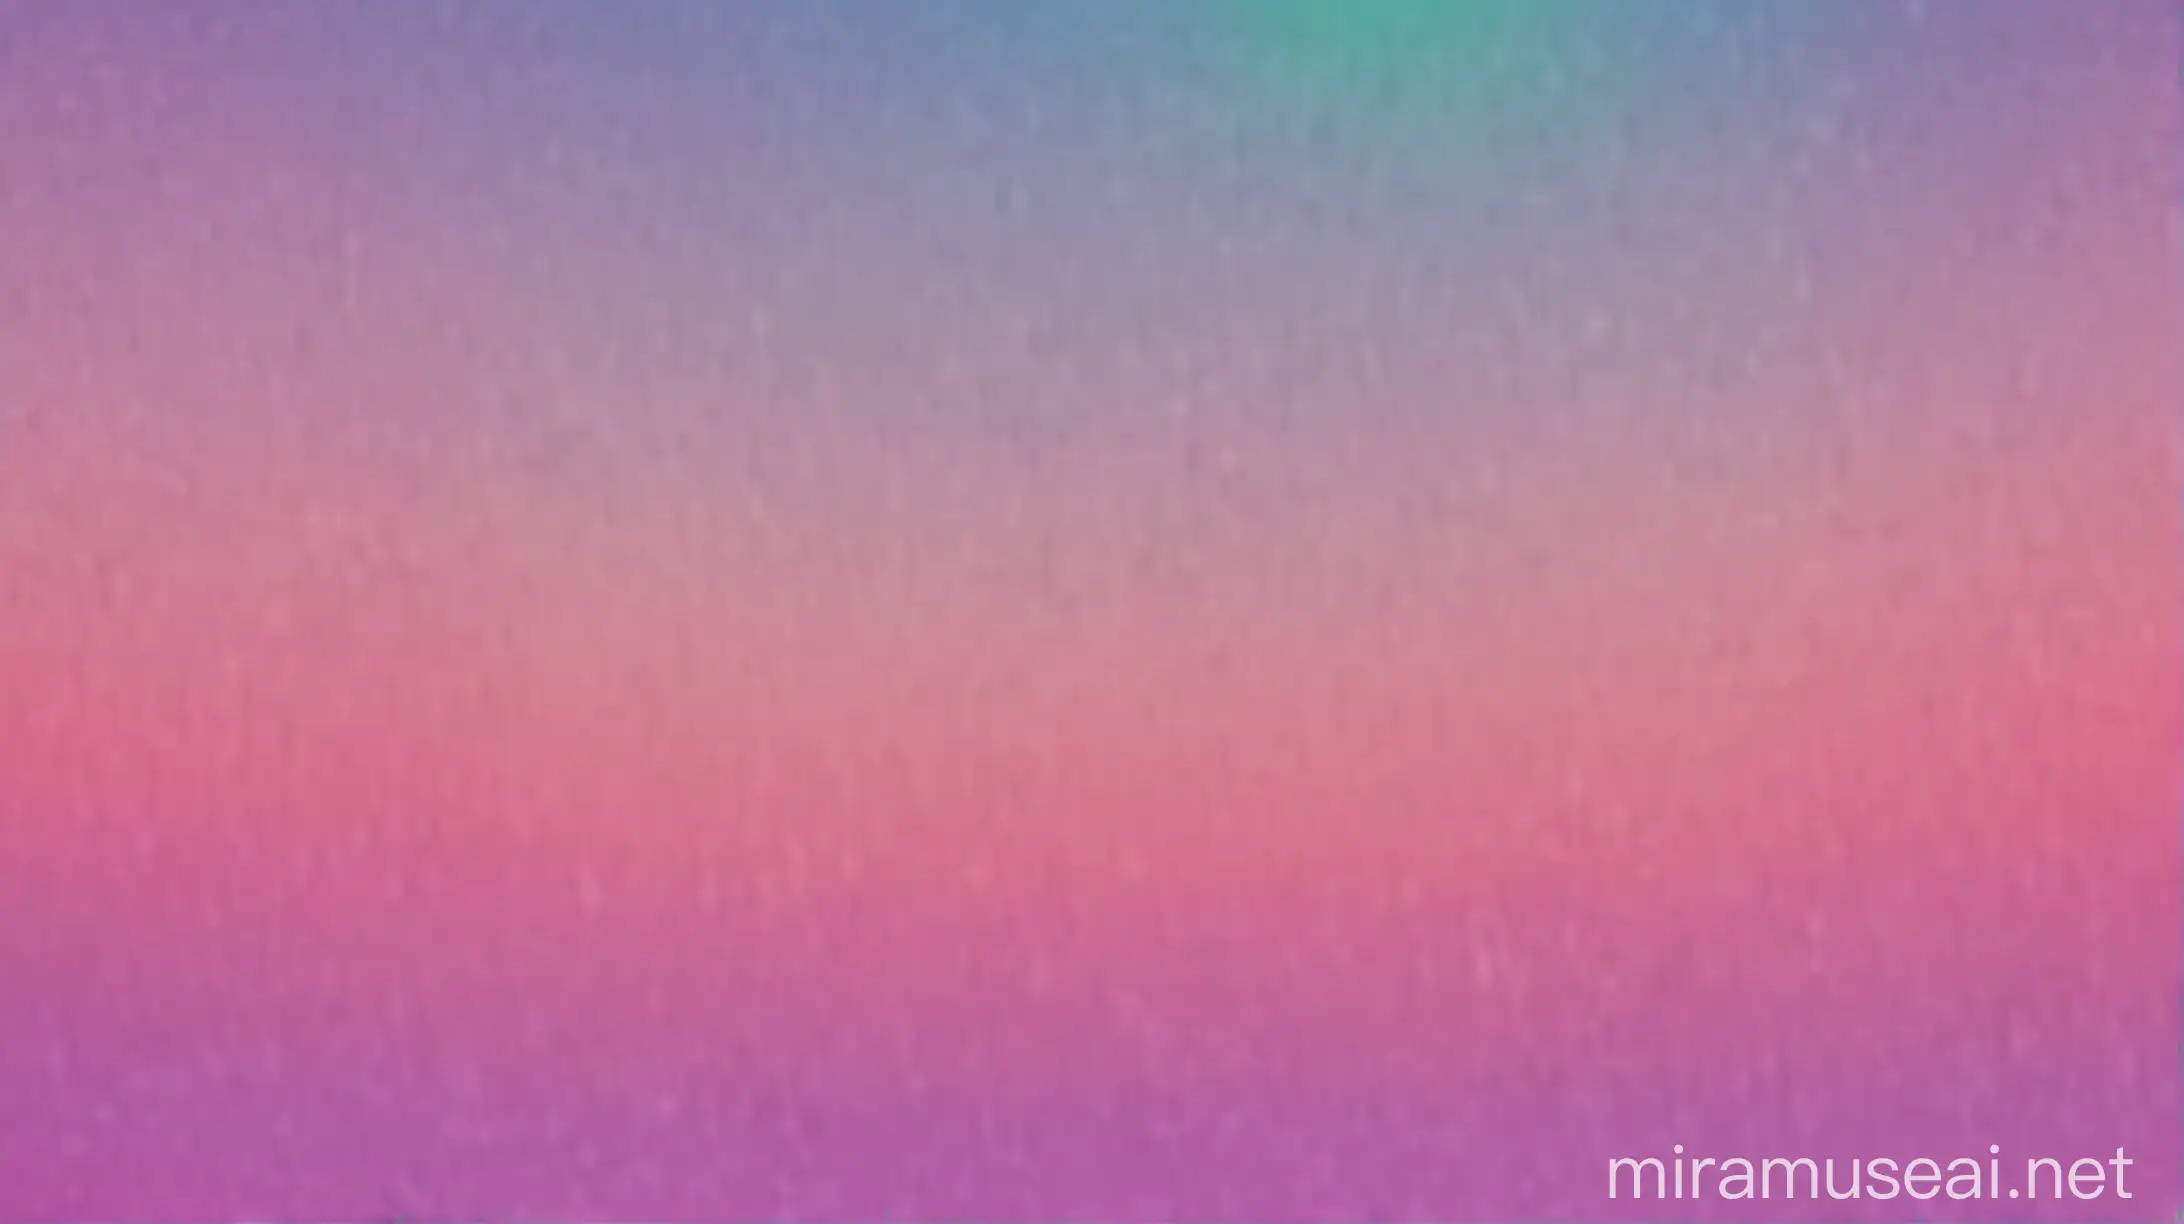 I need a colorful background with color code 003a0c to create a banner. Please create this image for me